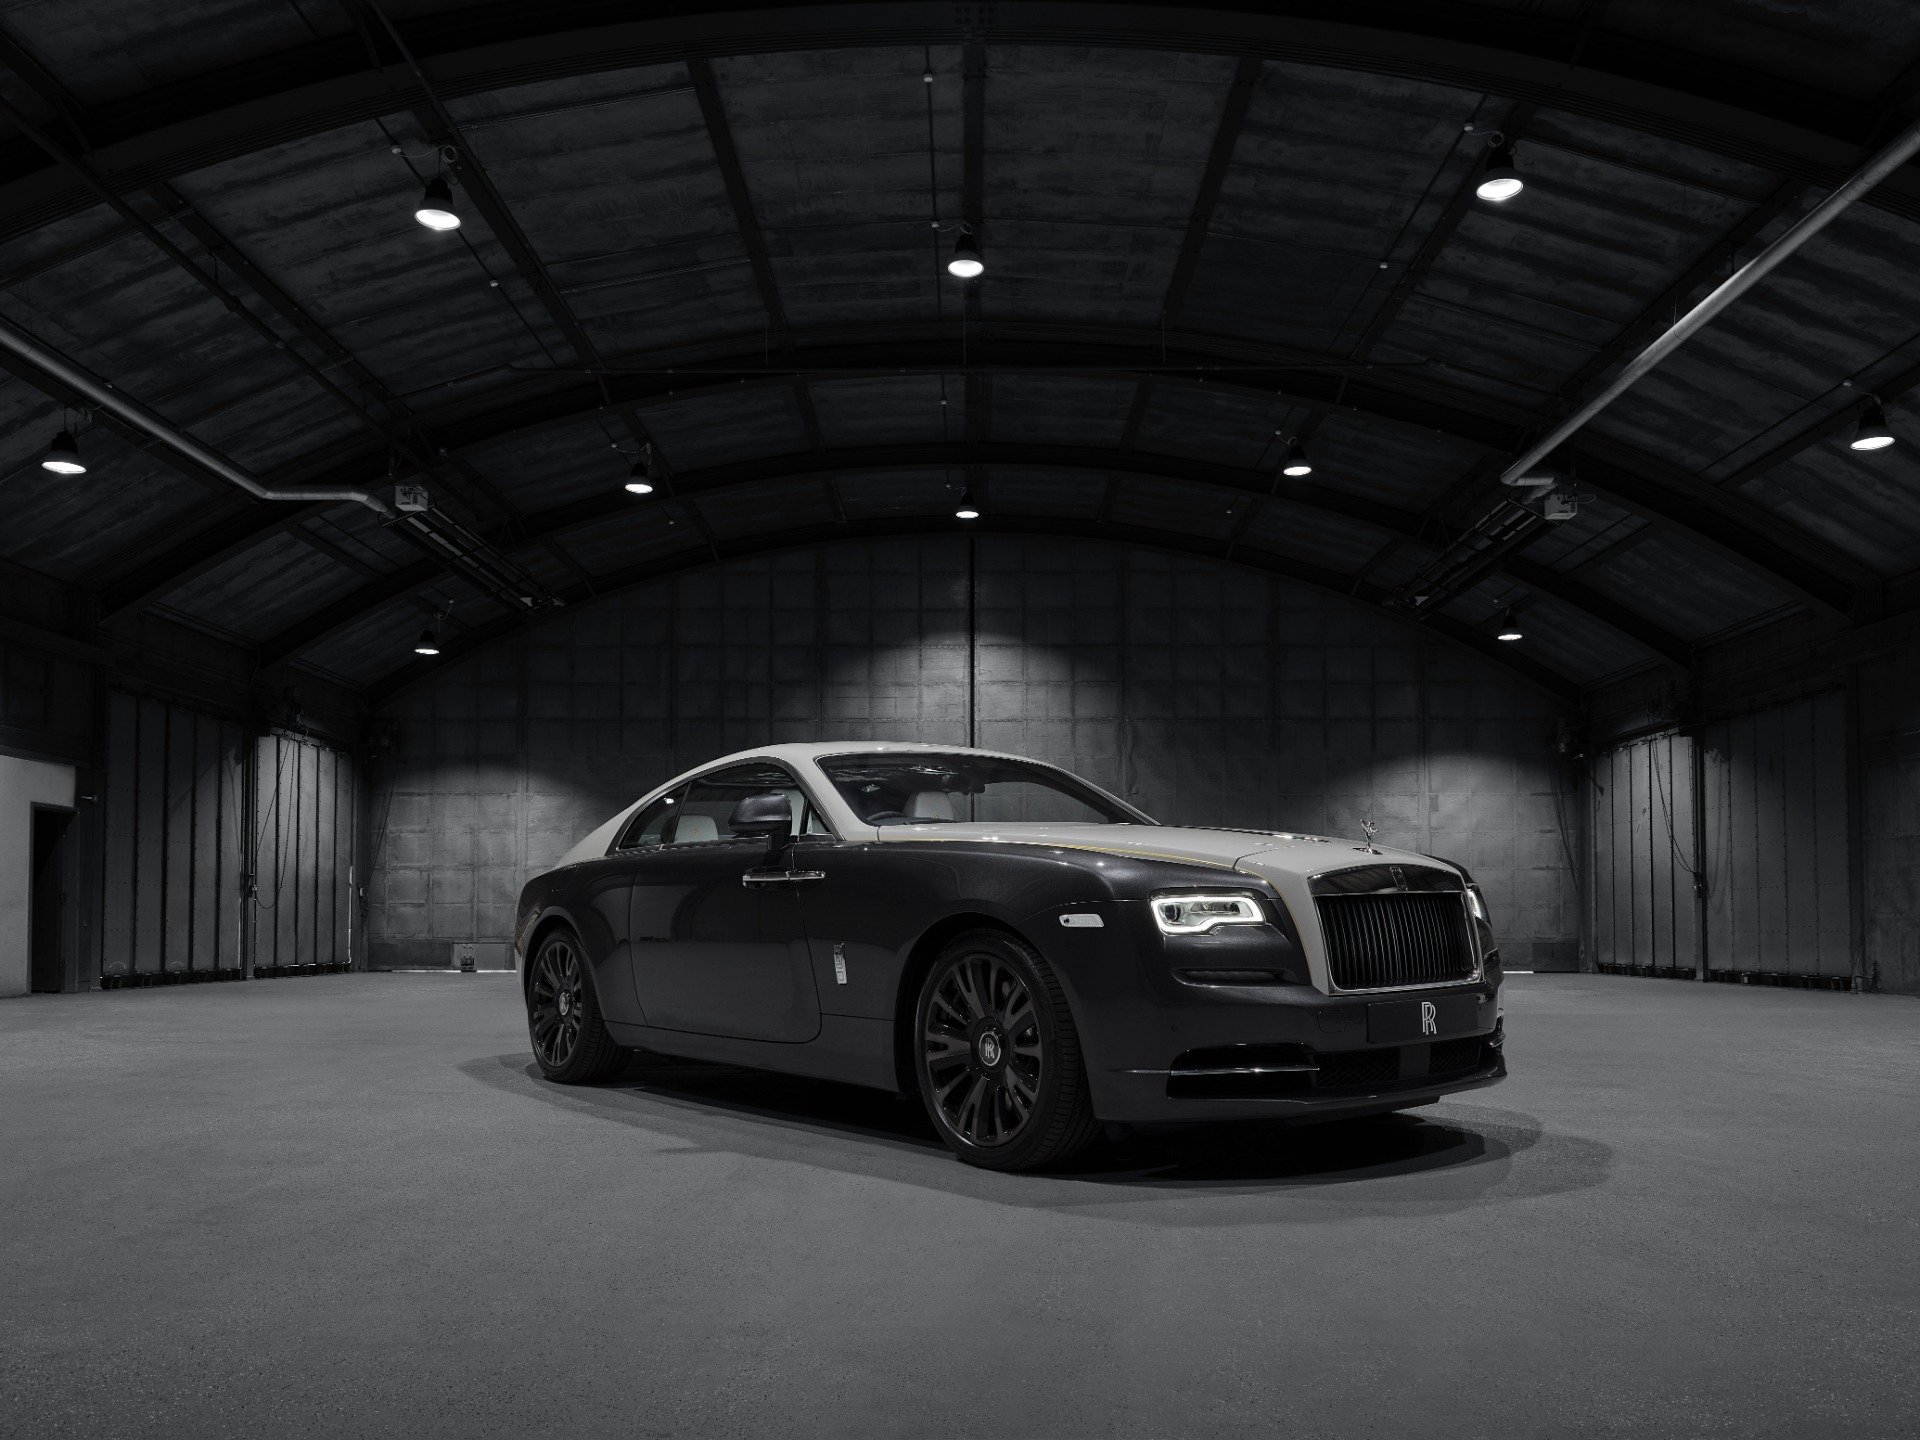 New 2020 Rolls-Royce Wraith Eagle for sale Sold at Rolls-Royce Motor Cars Greenwich in Greenwich CT 06830 1